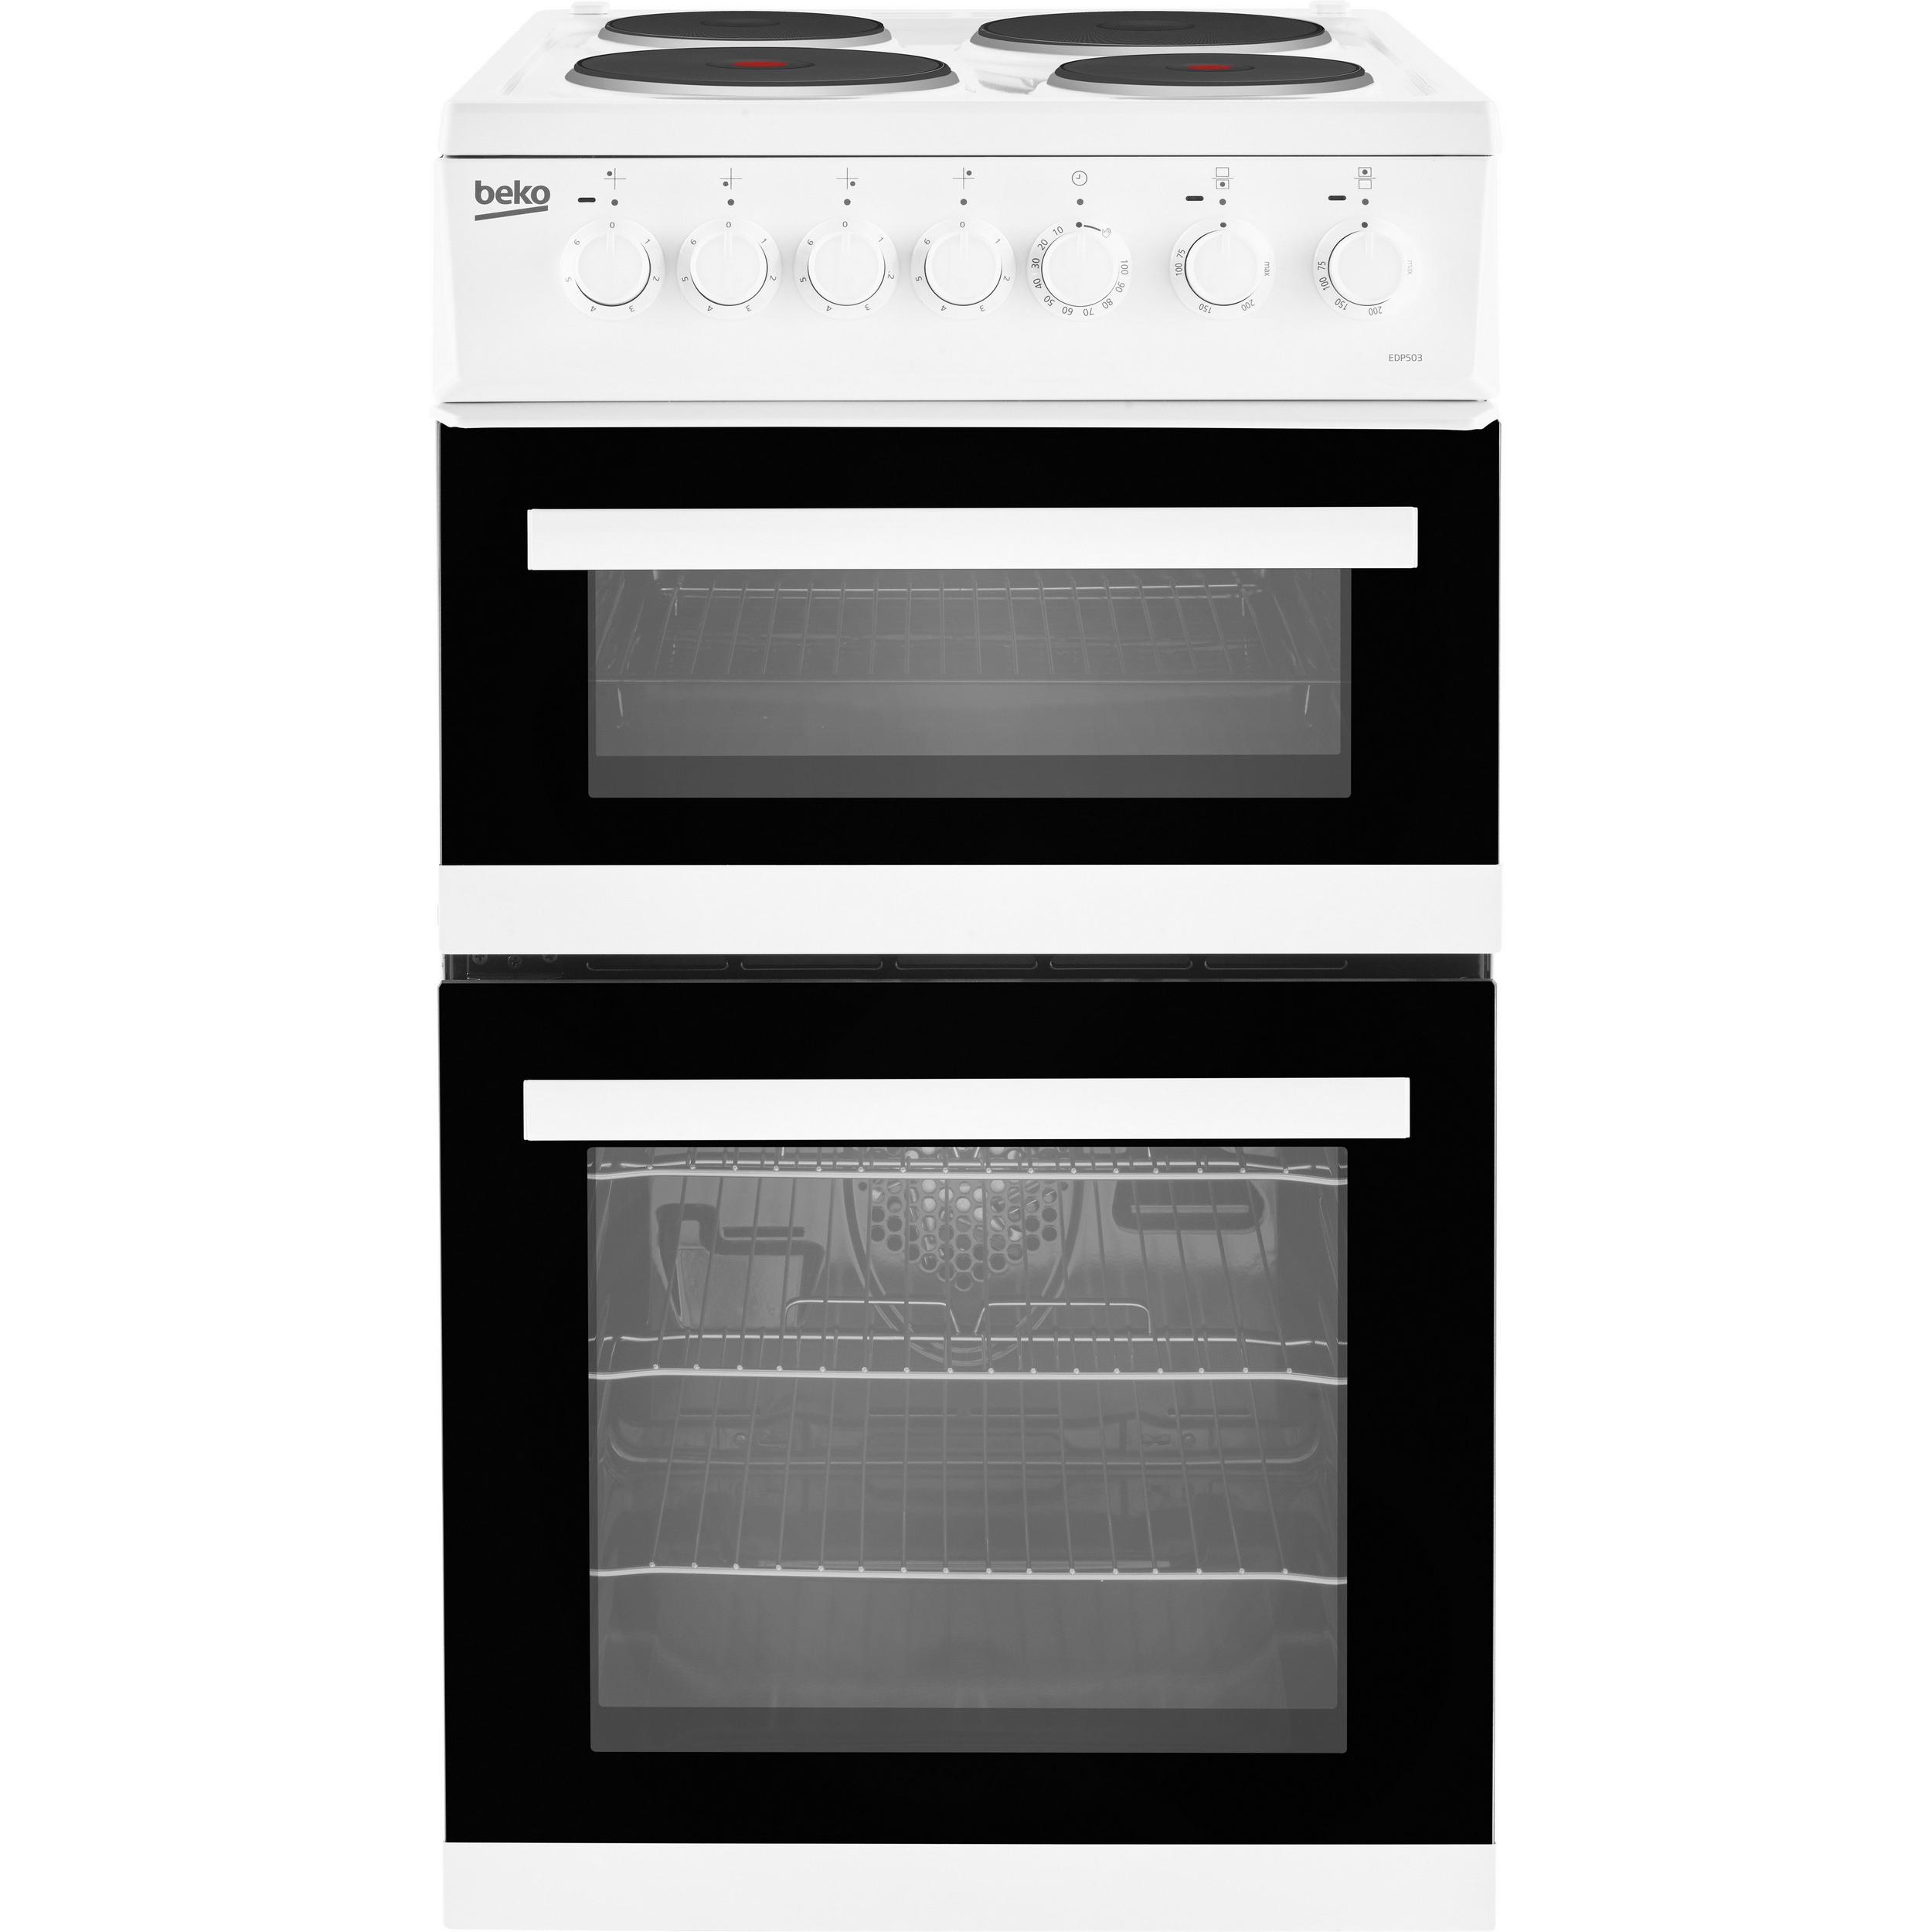 Beko EDP503W 50cm Double Oven Electric Cooker in White Solid Plate